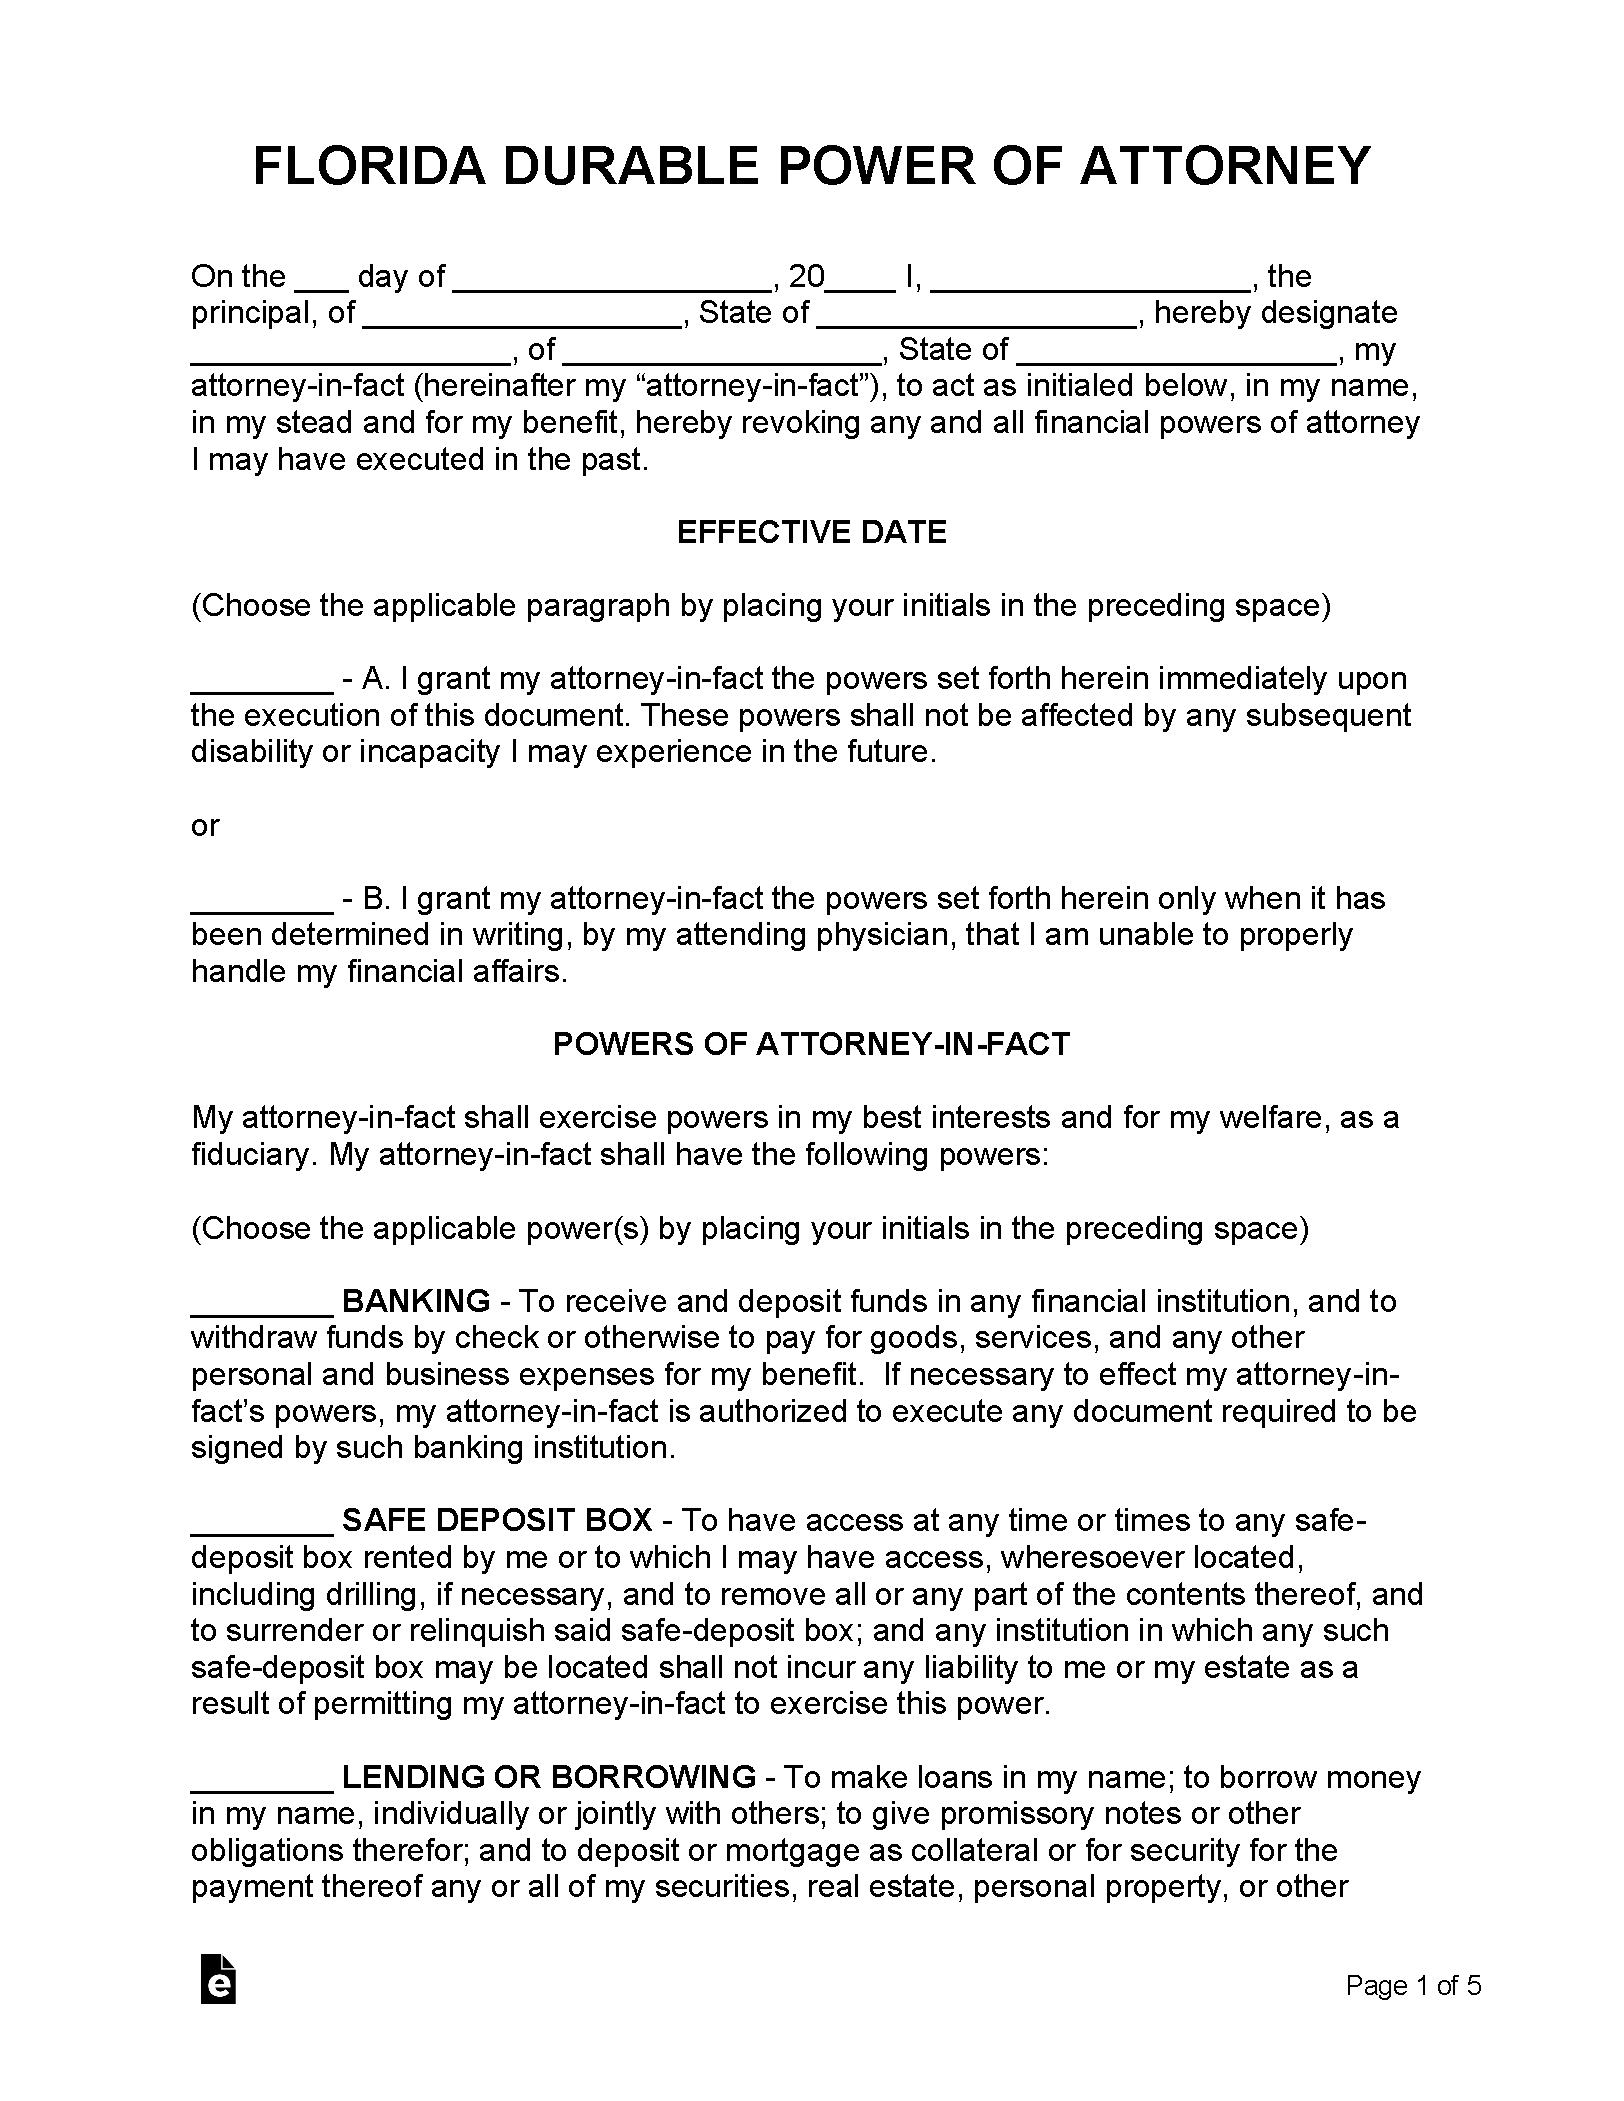 Free Durable Financial Power Of Attorney Florida Form Pdf Template